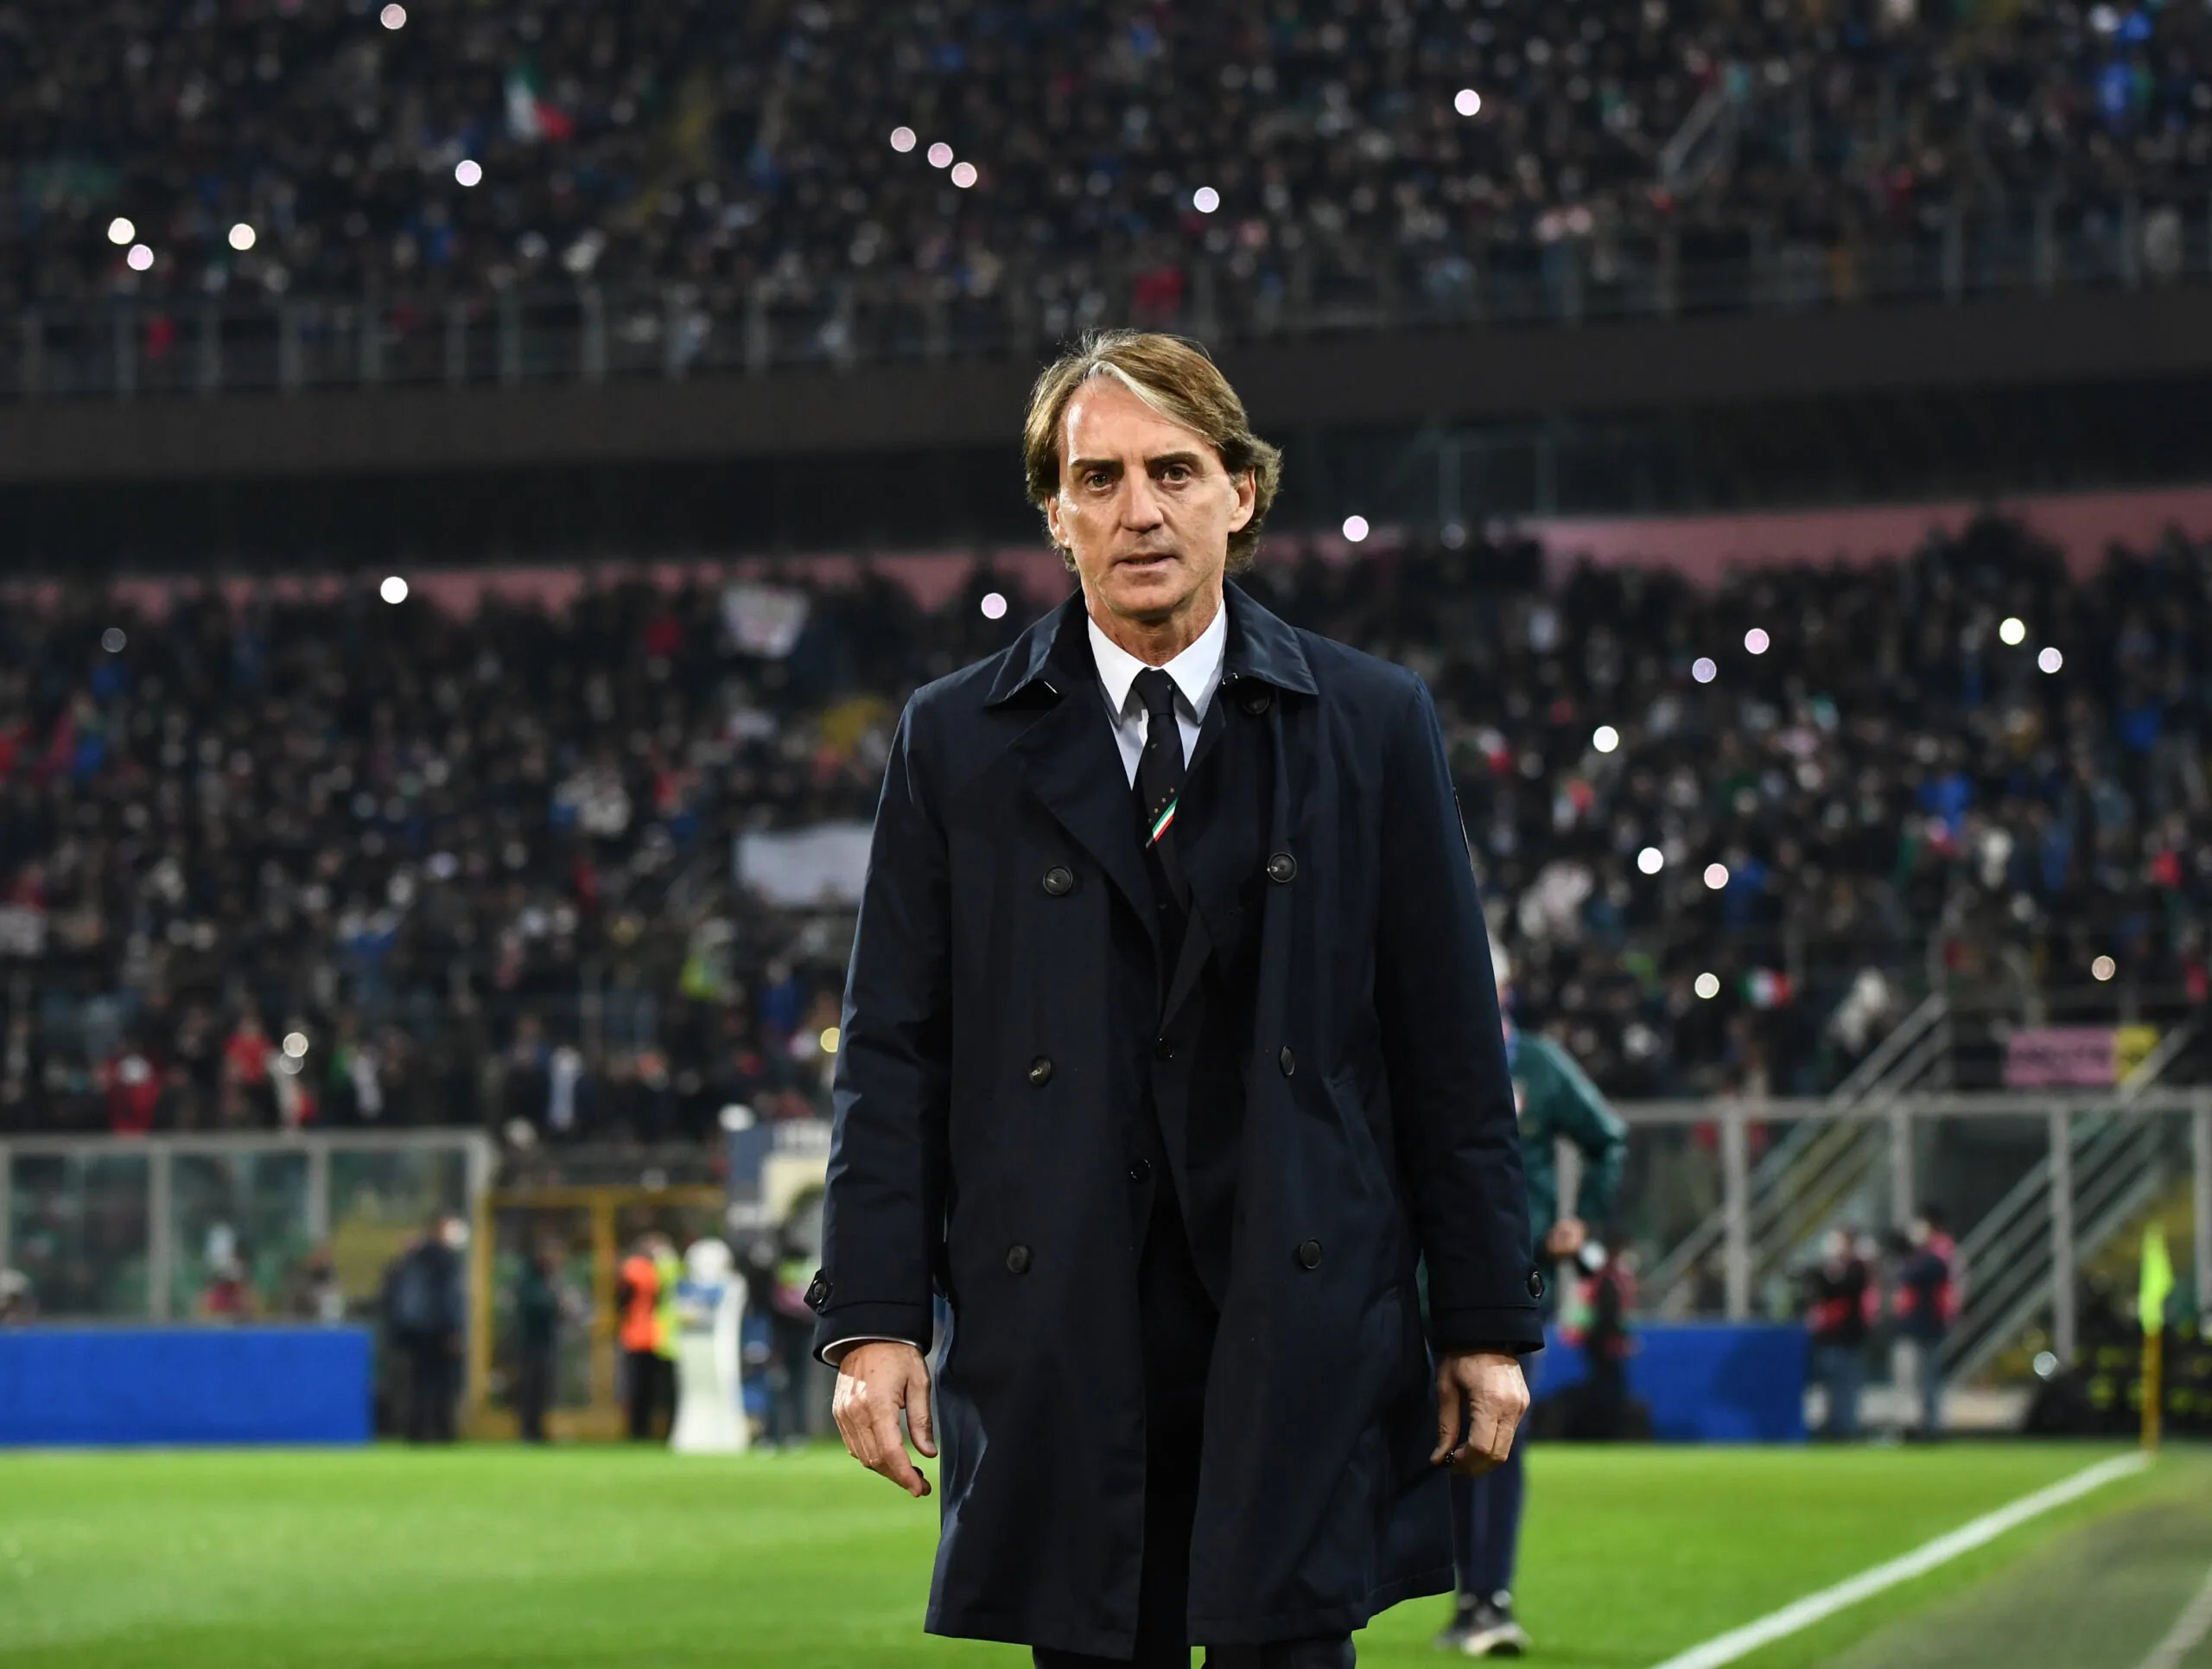 Newly-appointed Saudi Arabia national team coach Roberto Mancini has lashed out at the Italian Football Federation, FIGC, for treating him unfavorably.